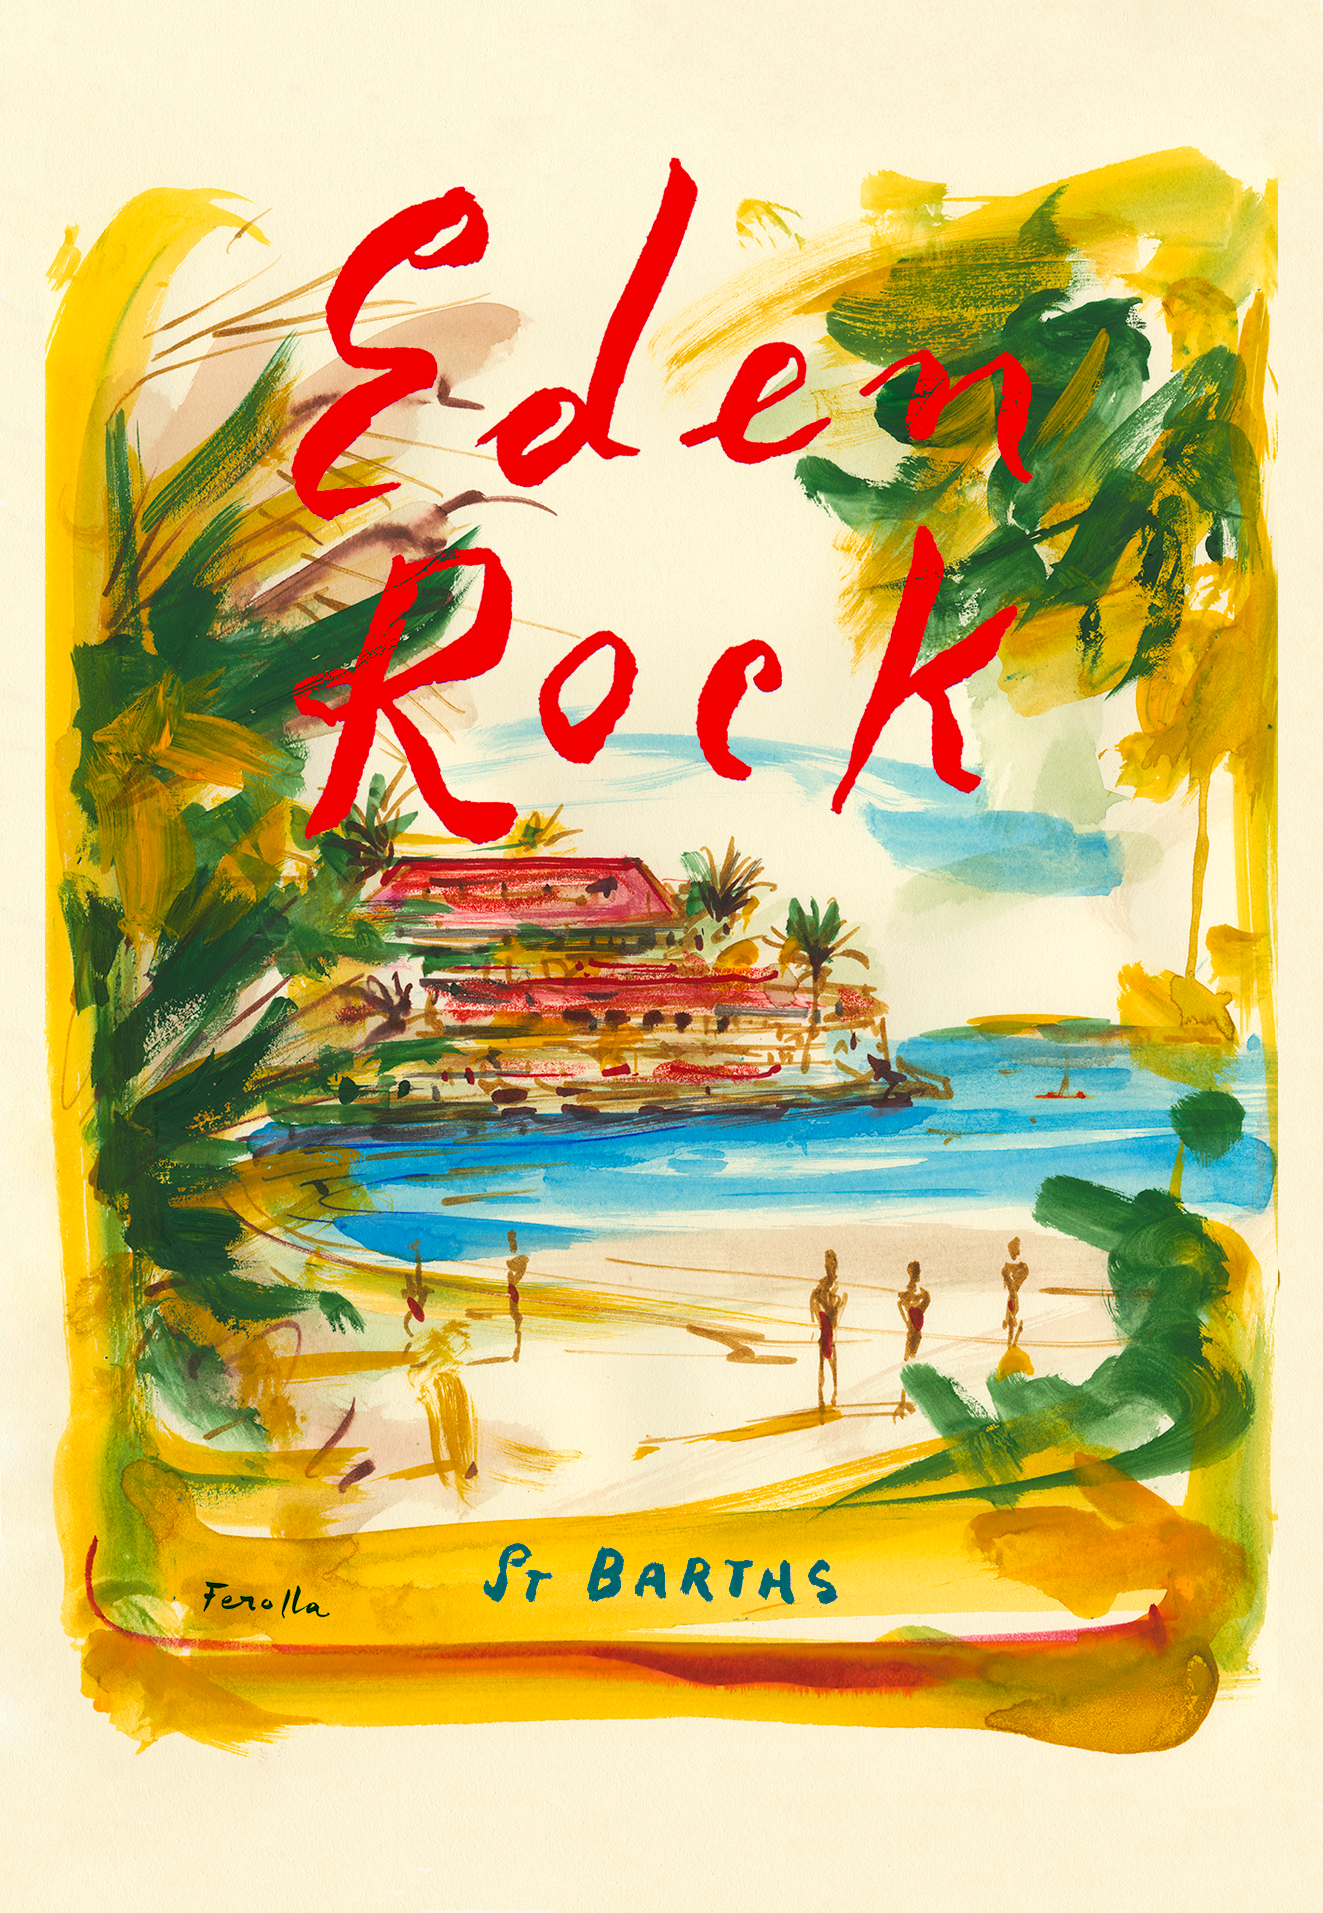 Eden Rock - St Barths Art Print by Andrea Ferolla for Oetker Collection Hotel Boutique